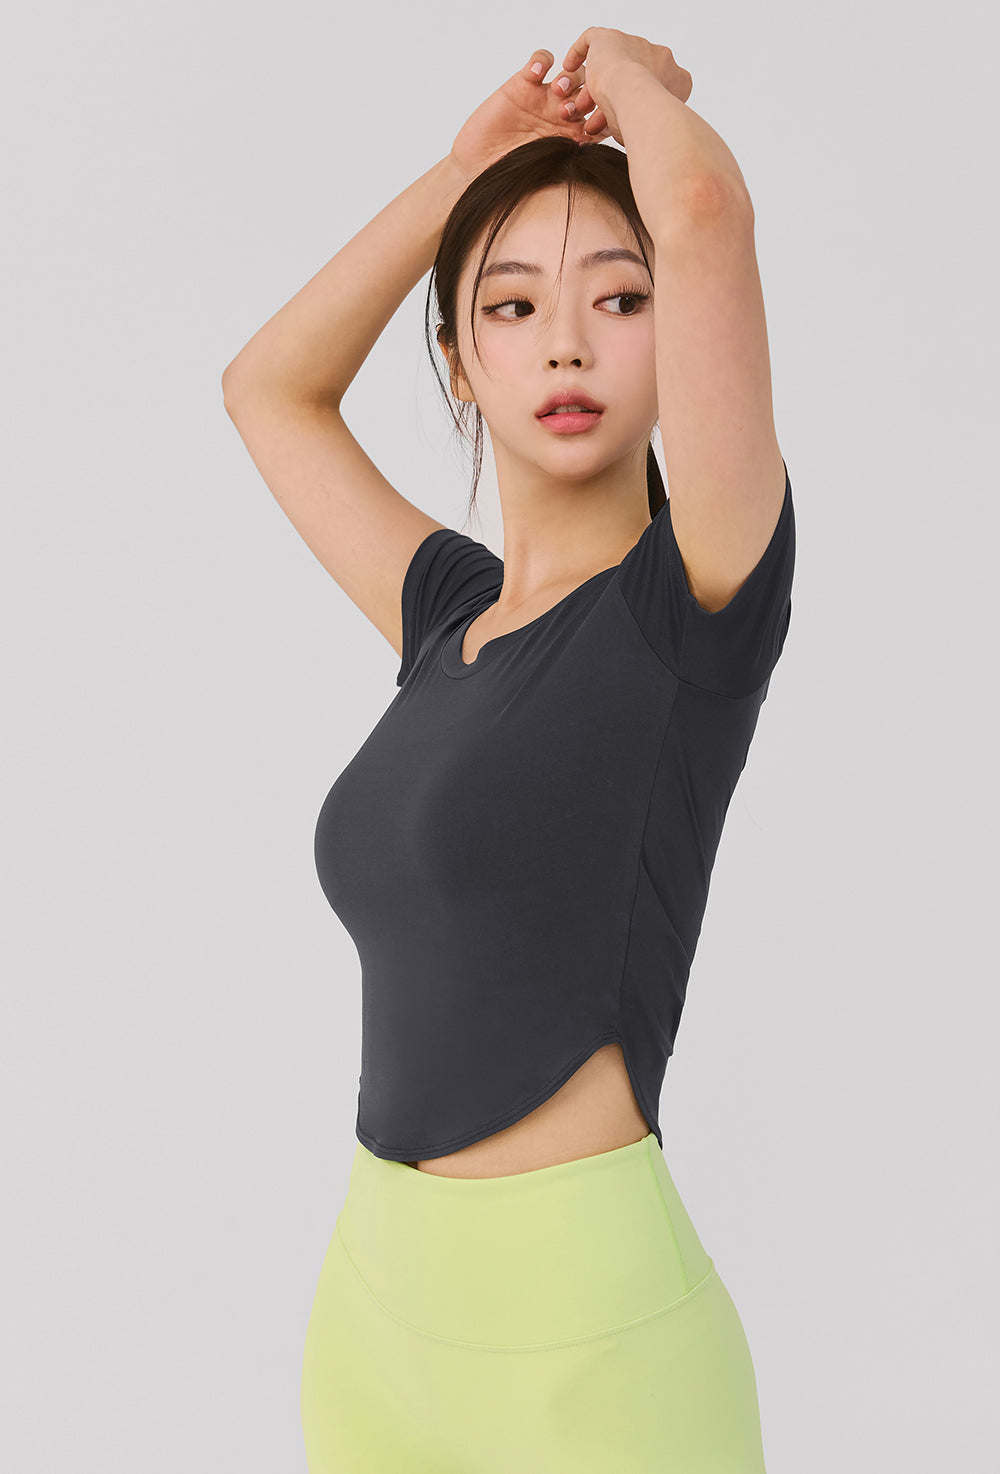 XELLA Light Round Crop Top - Charcoal Gray (Clearance)